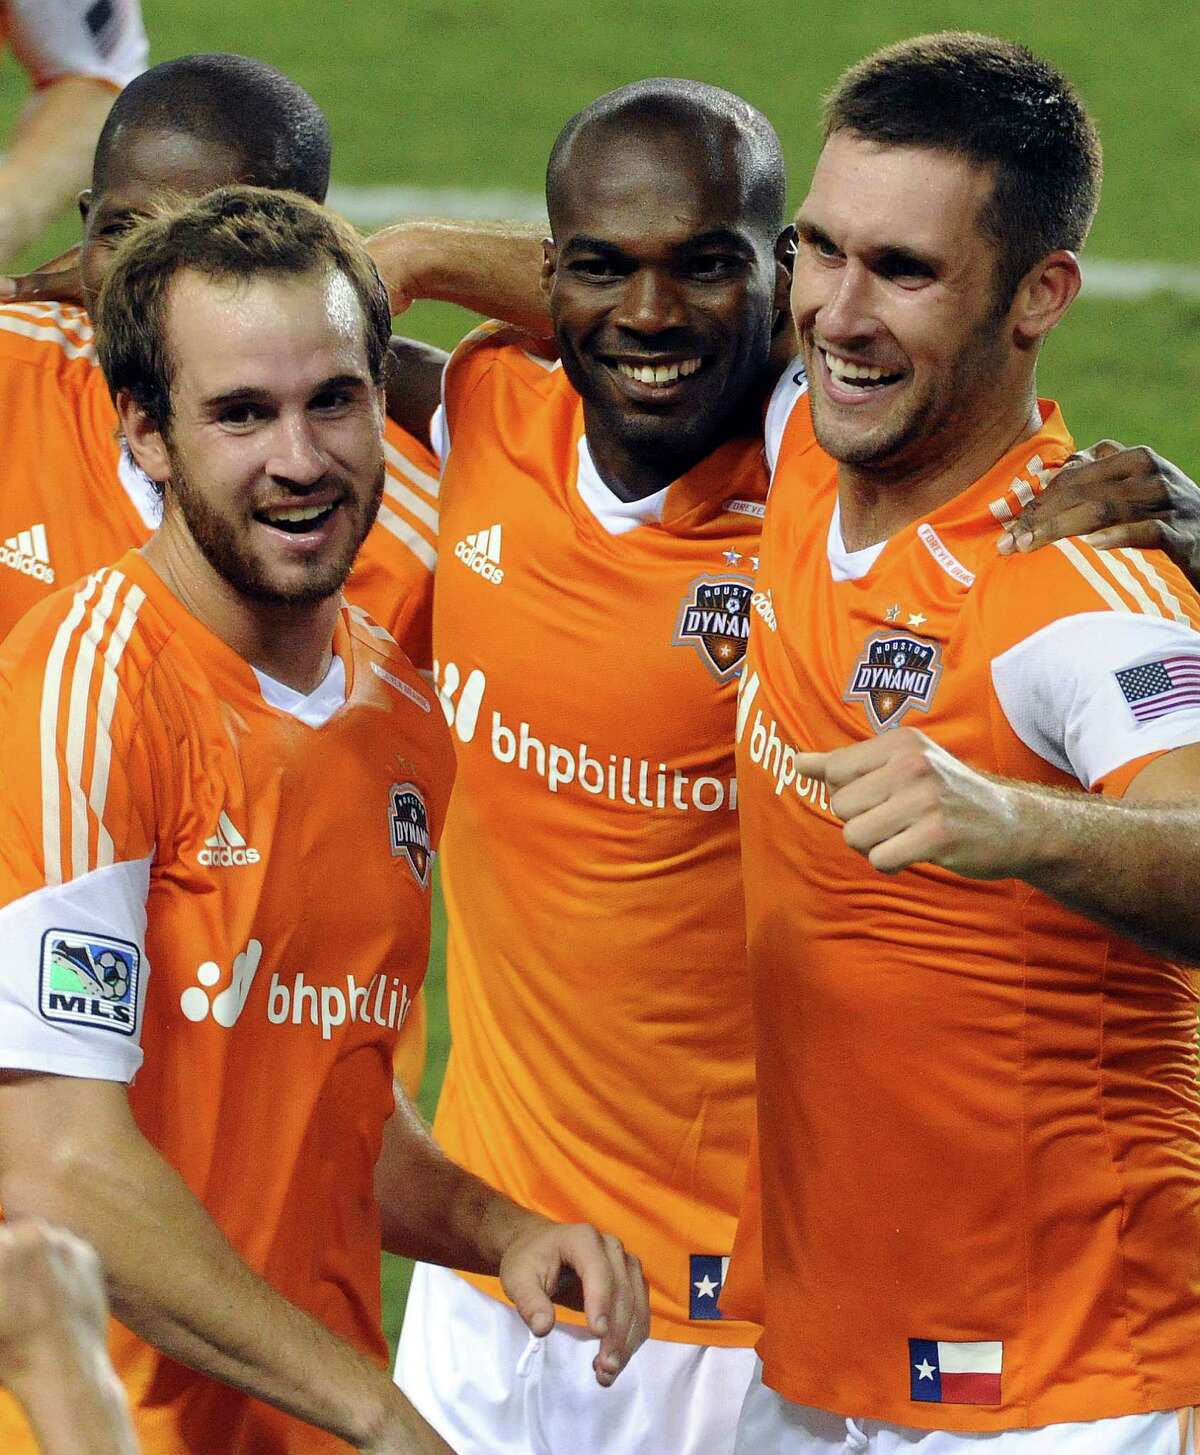 Houston Dynamo forward Will Bruin, right, celebrates his game-winning goal in the 90th minute with Brian Ownby, left, and Omar Cummings during the second half of an MLS soccer game against D.C. United, Sunday, August 3, 2014, at BBVA Compass Stadium in Houston.